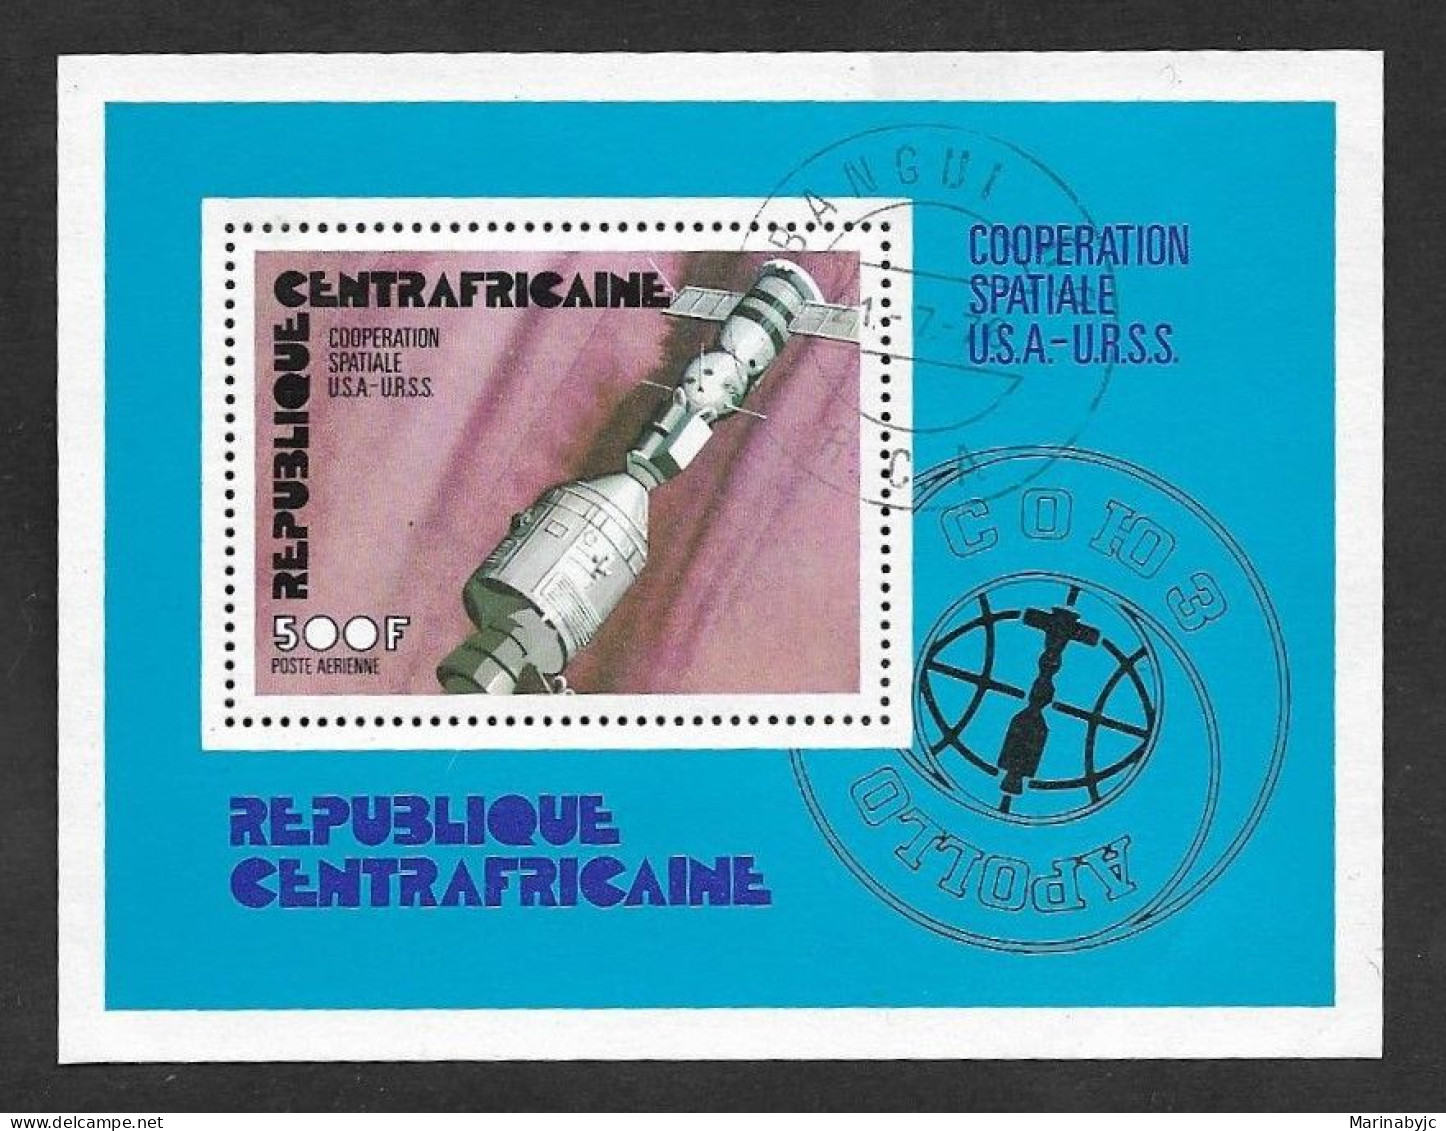 SD)1970 CENTRAL AFRICAN R.  SPACE SERIES, US - USSR SPACE COOPERATION "APOLLO - SOYUZ", SOUVENIR SHEET, CTO - Africa (Other)